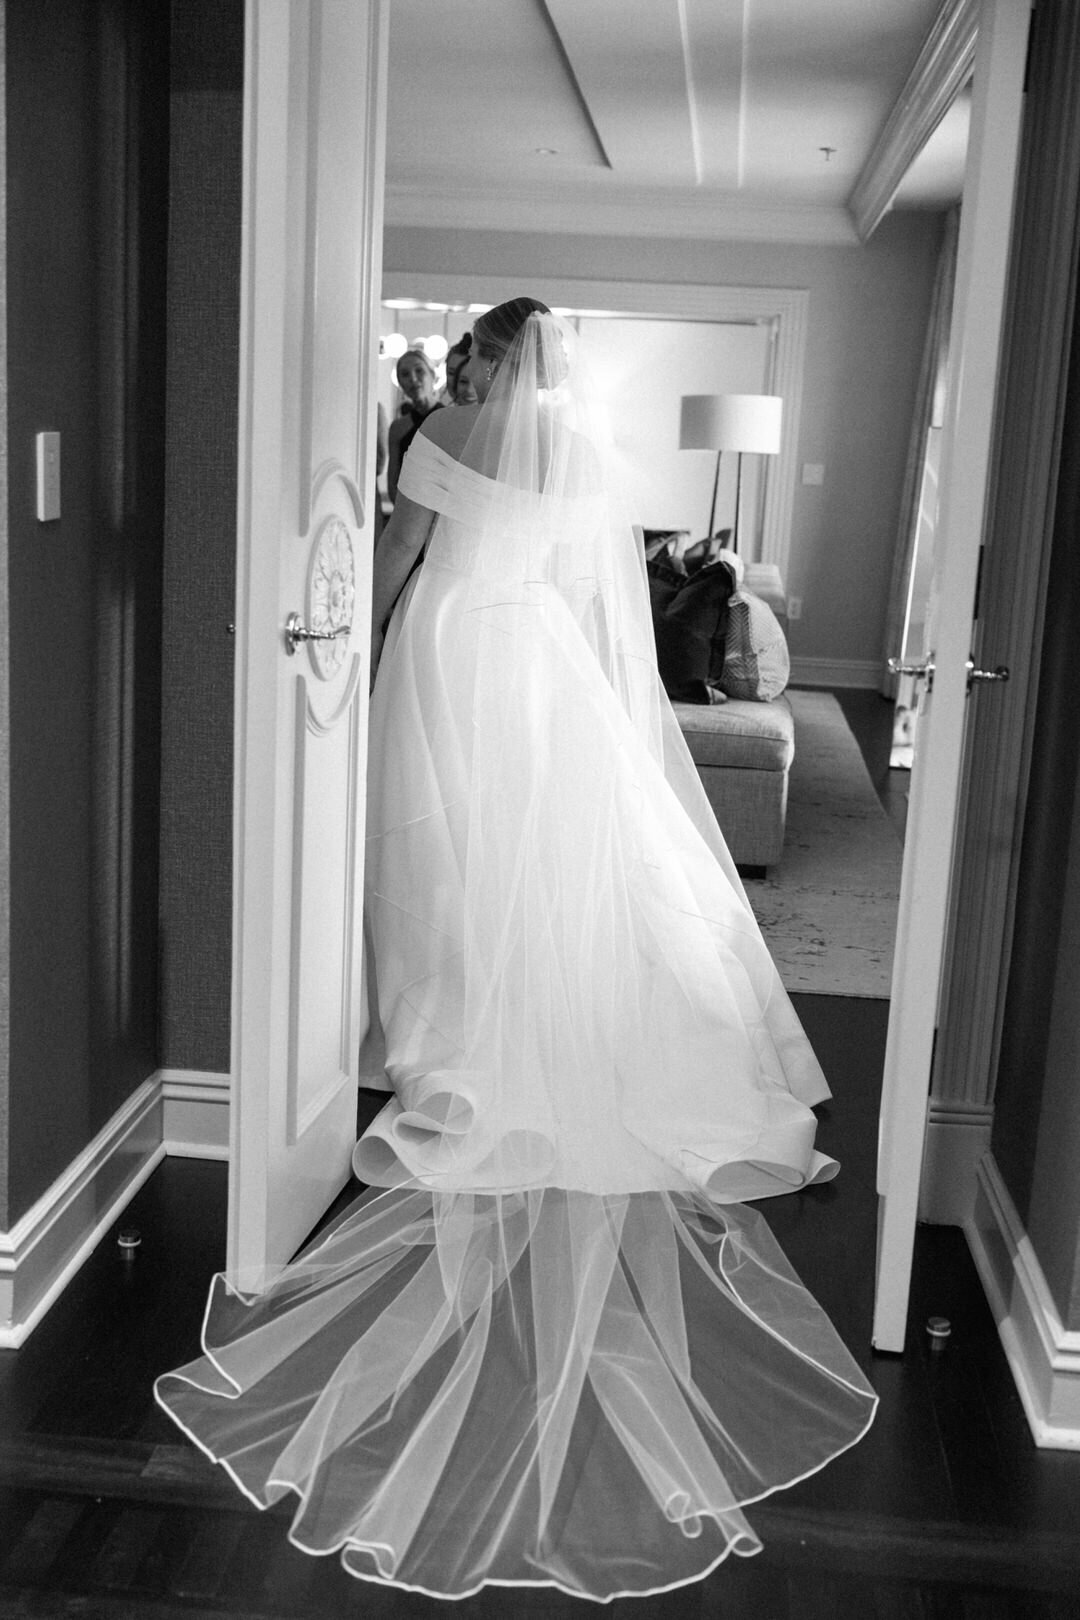 Black and White of Bride Walking Through doorway with Veil Trailing